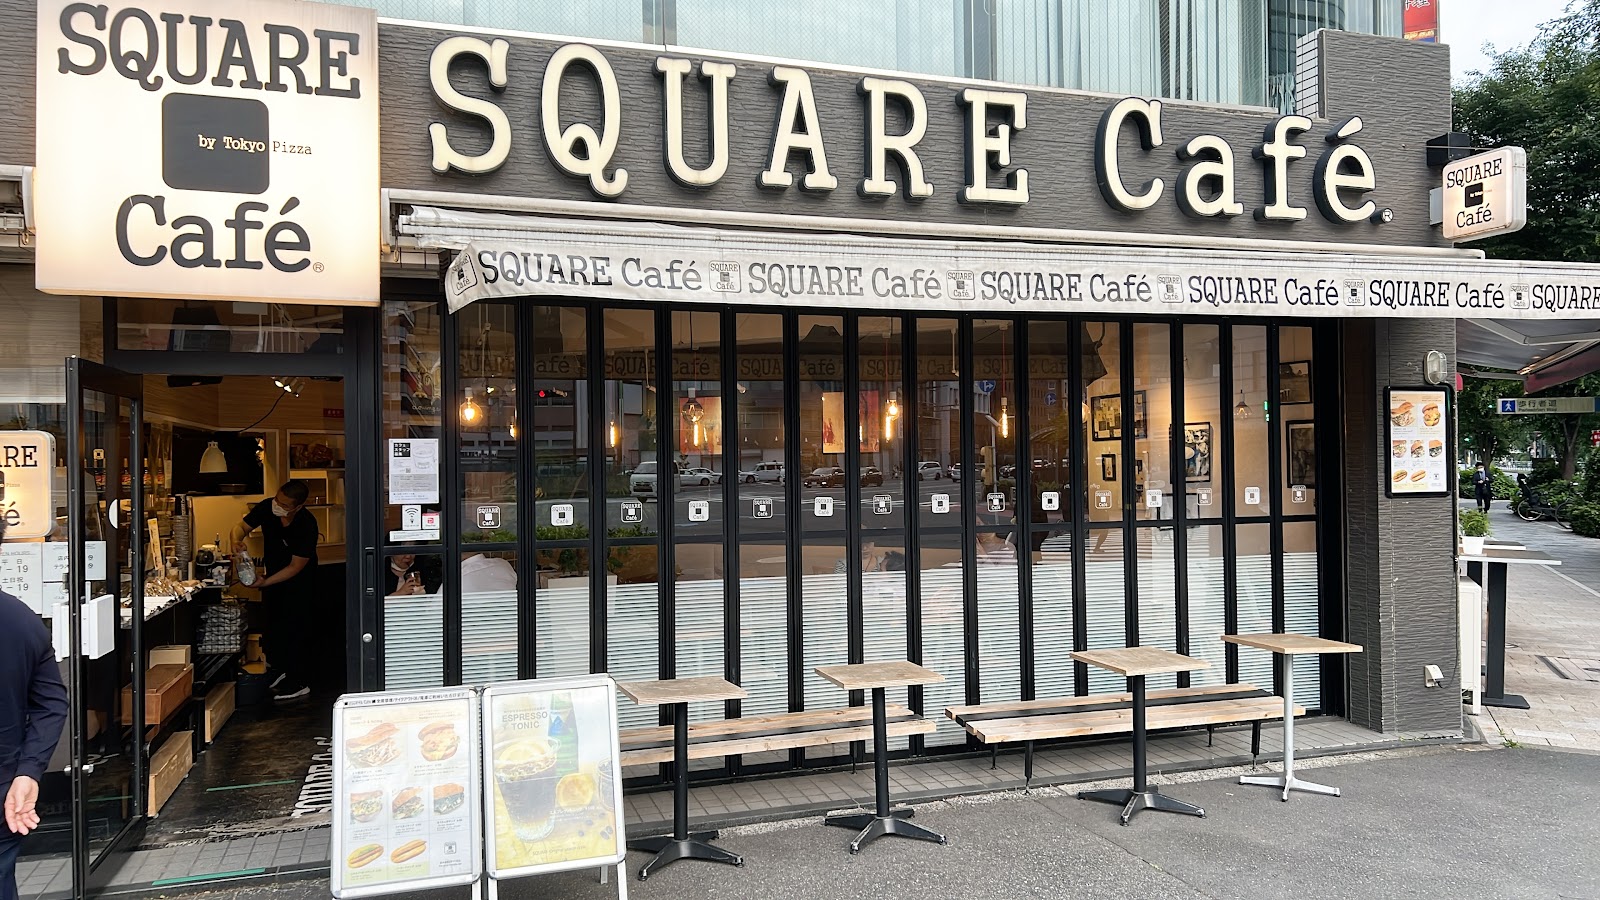 SQUARE Cafe 東日本橋 本店にて